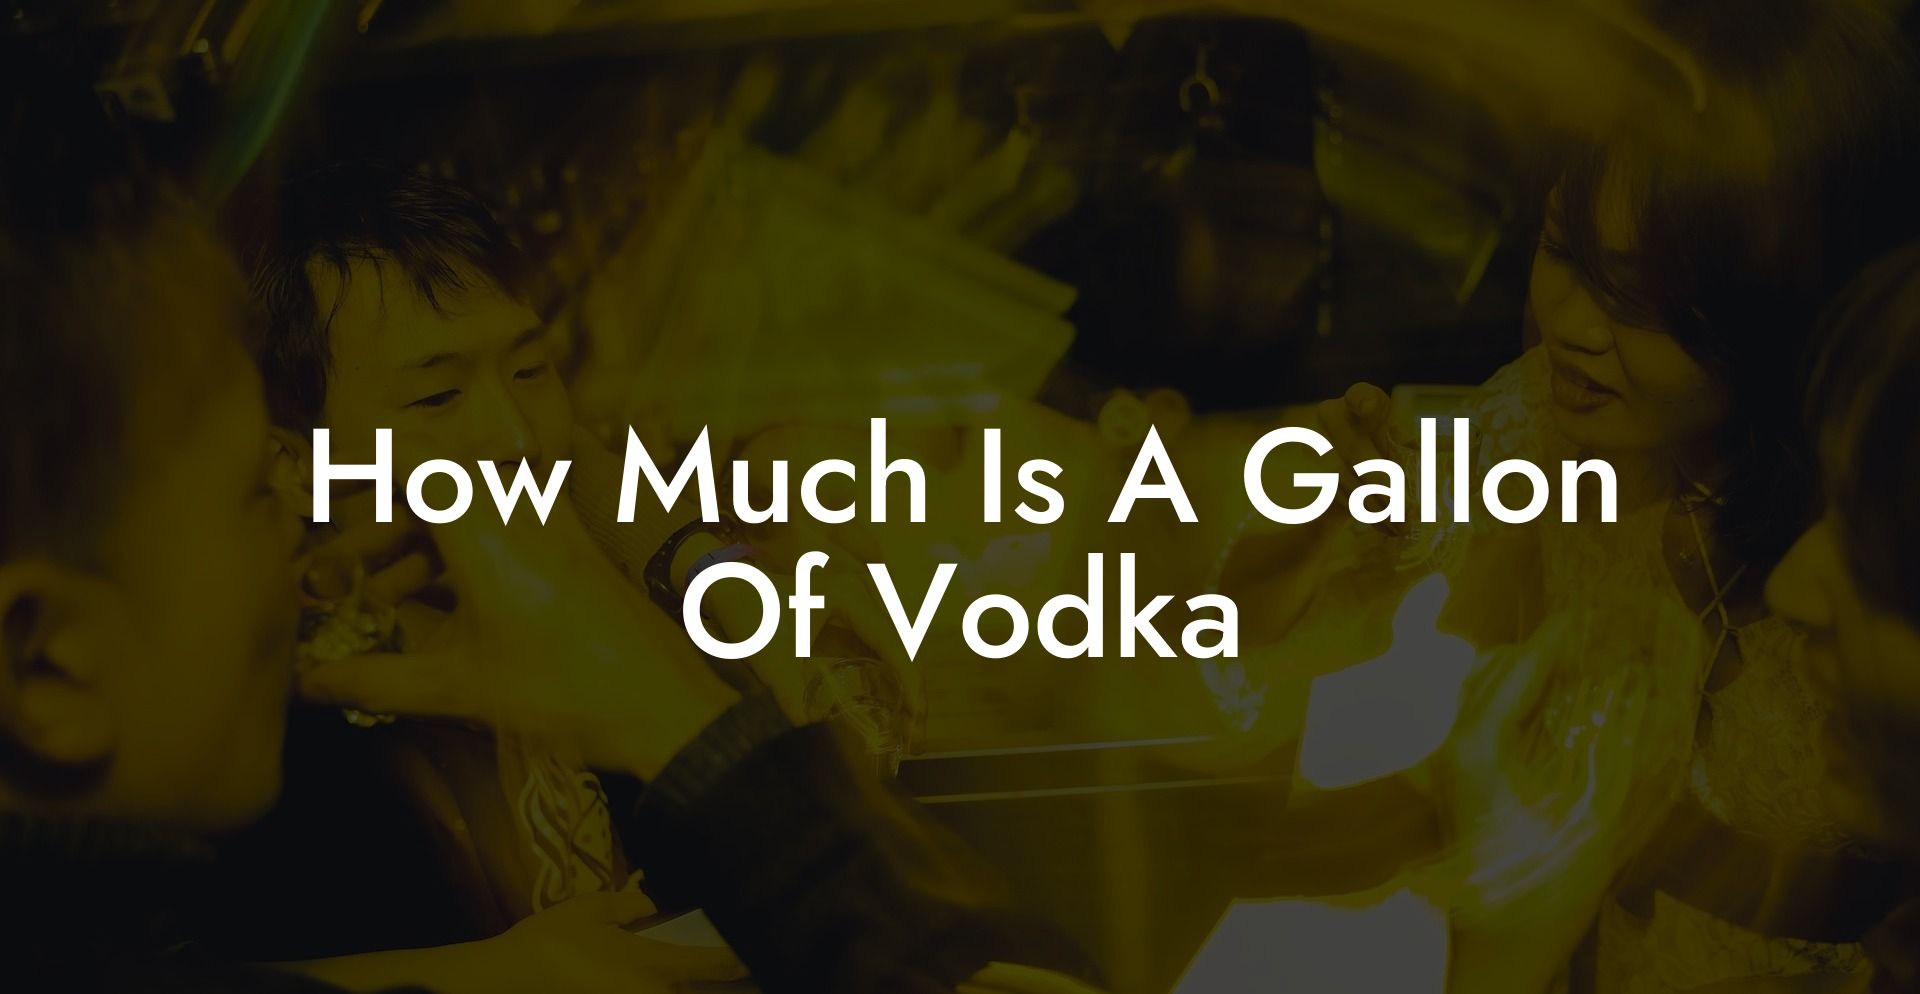 How Much Is A Gallon Of Vodka